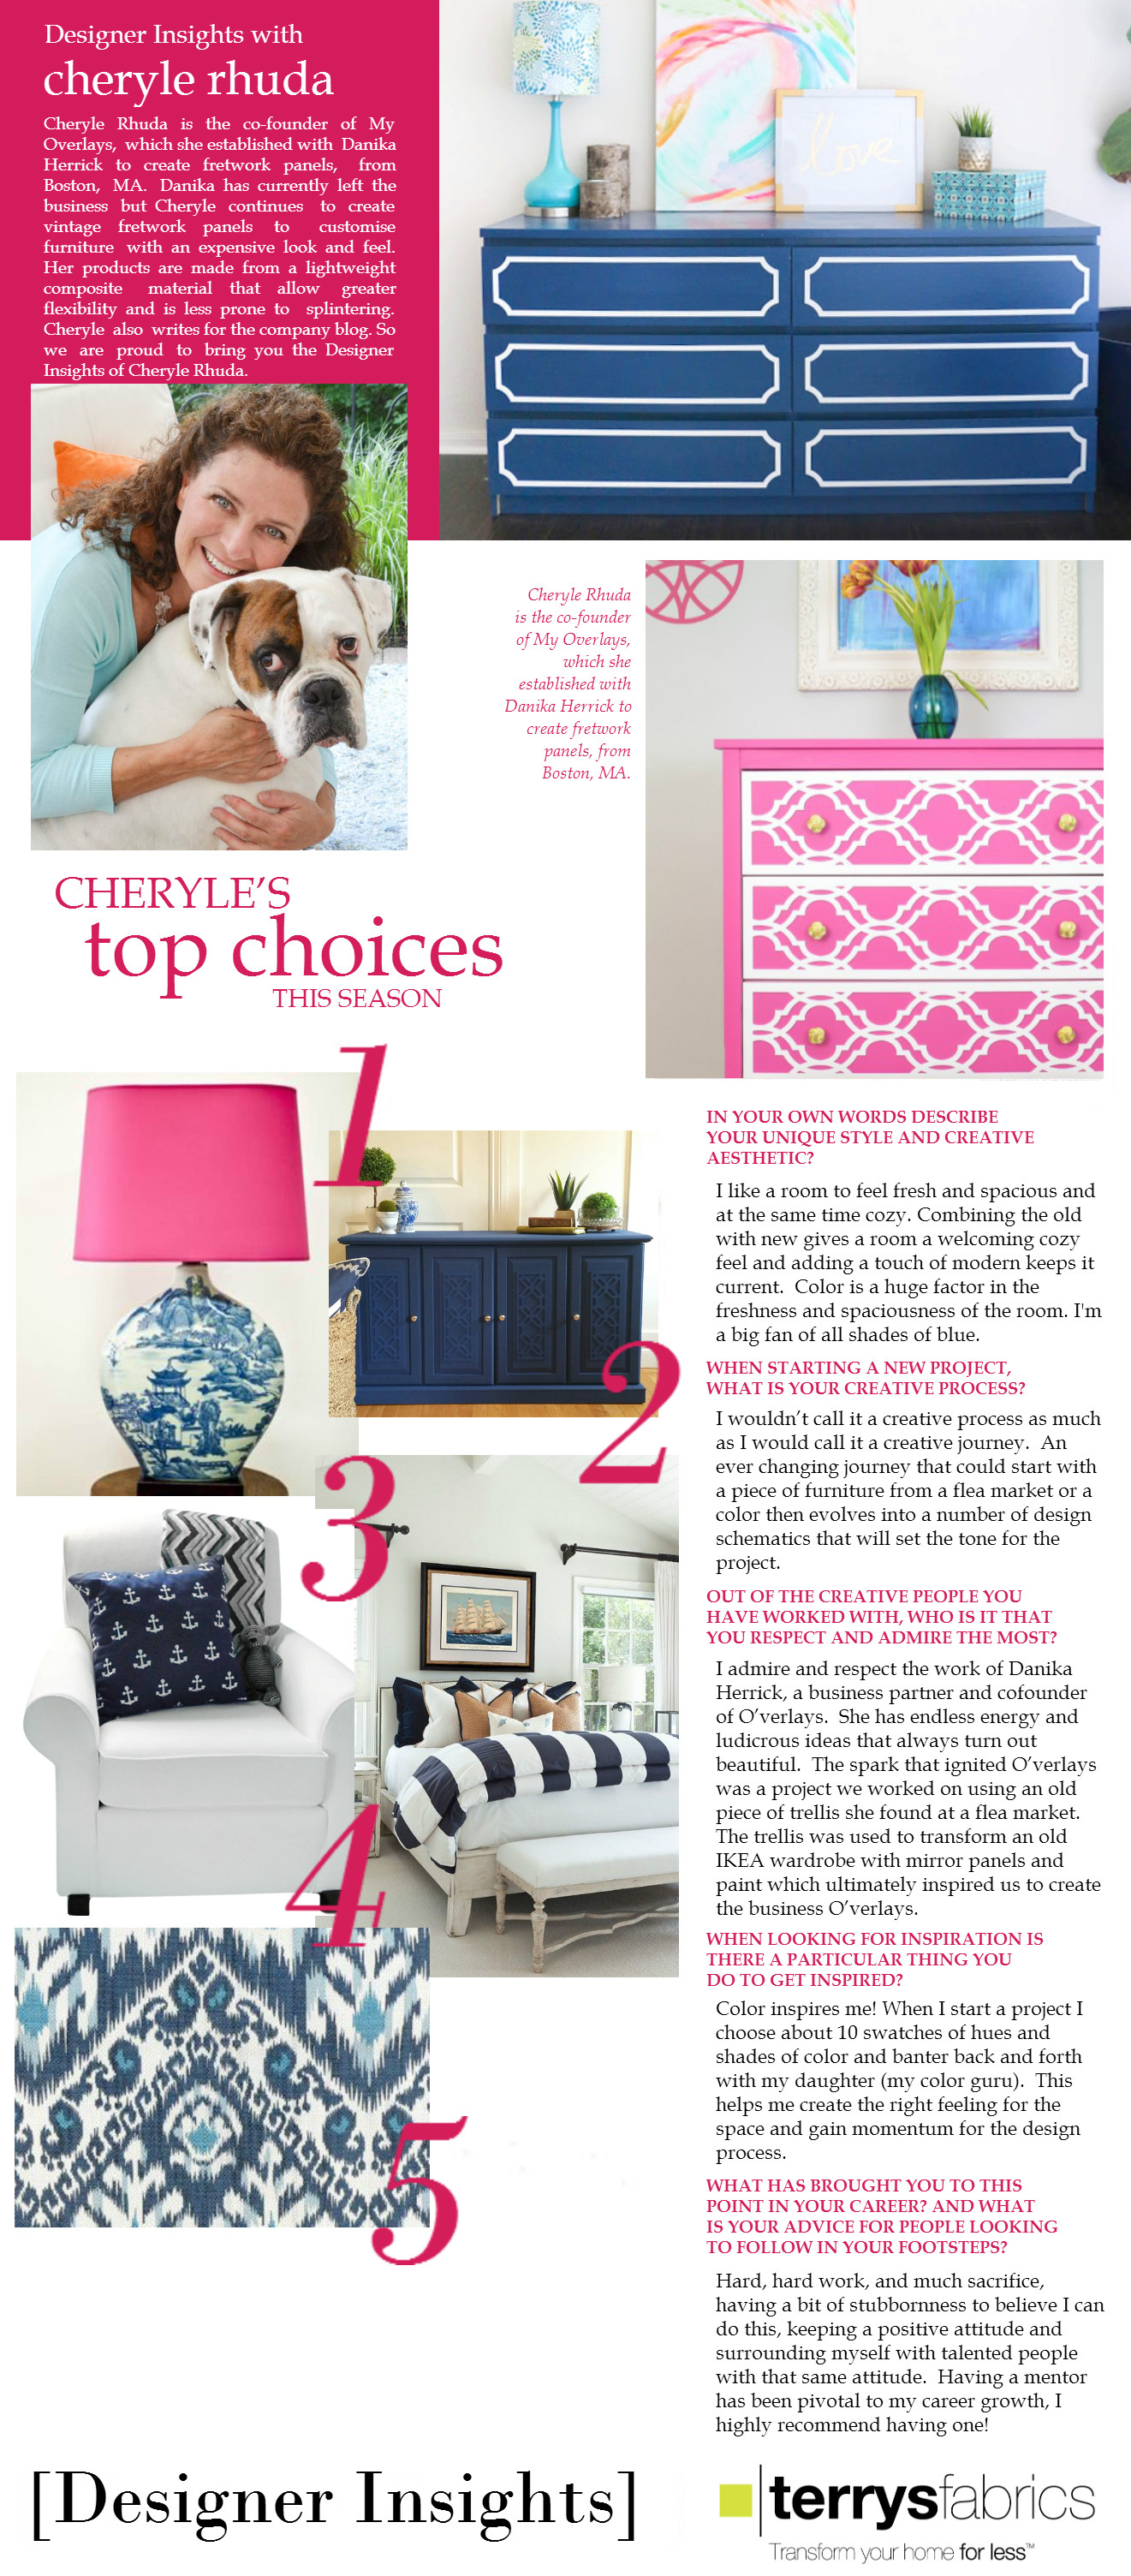 Terry Fabrics UK features Designer Insights with Cheryle Rhuda